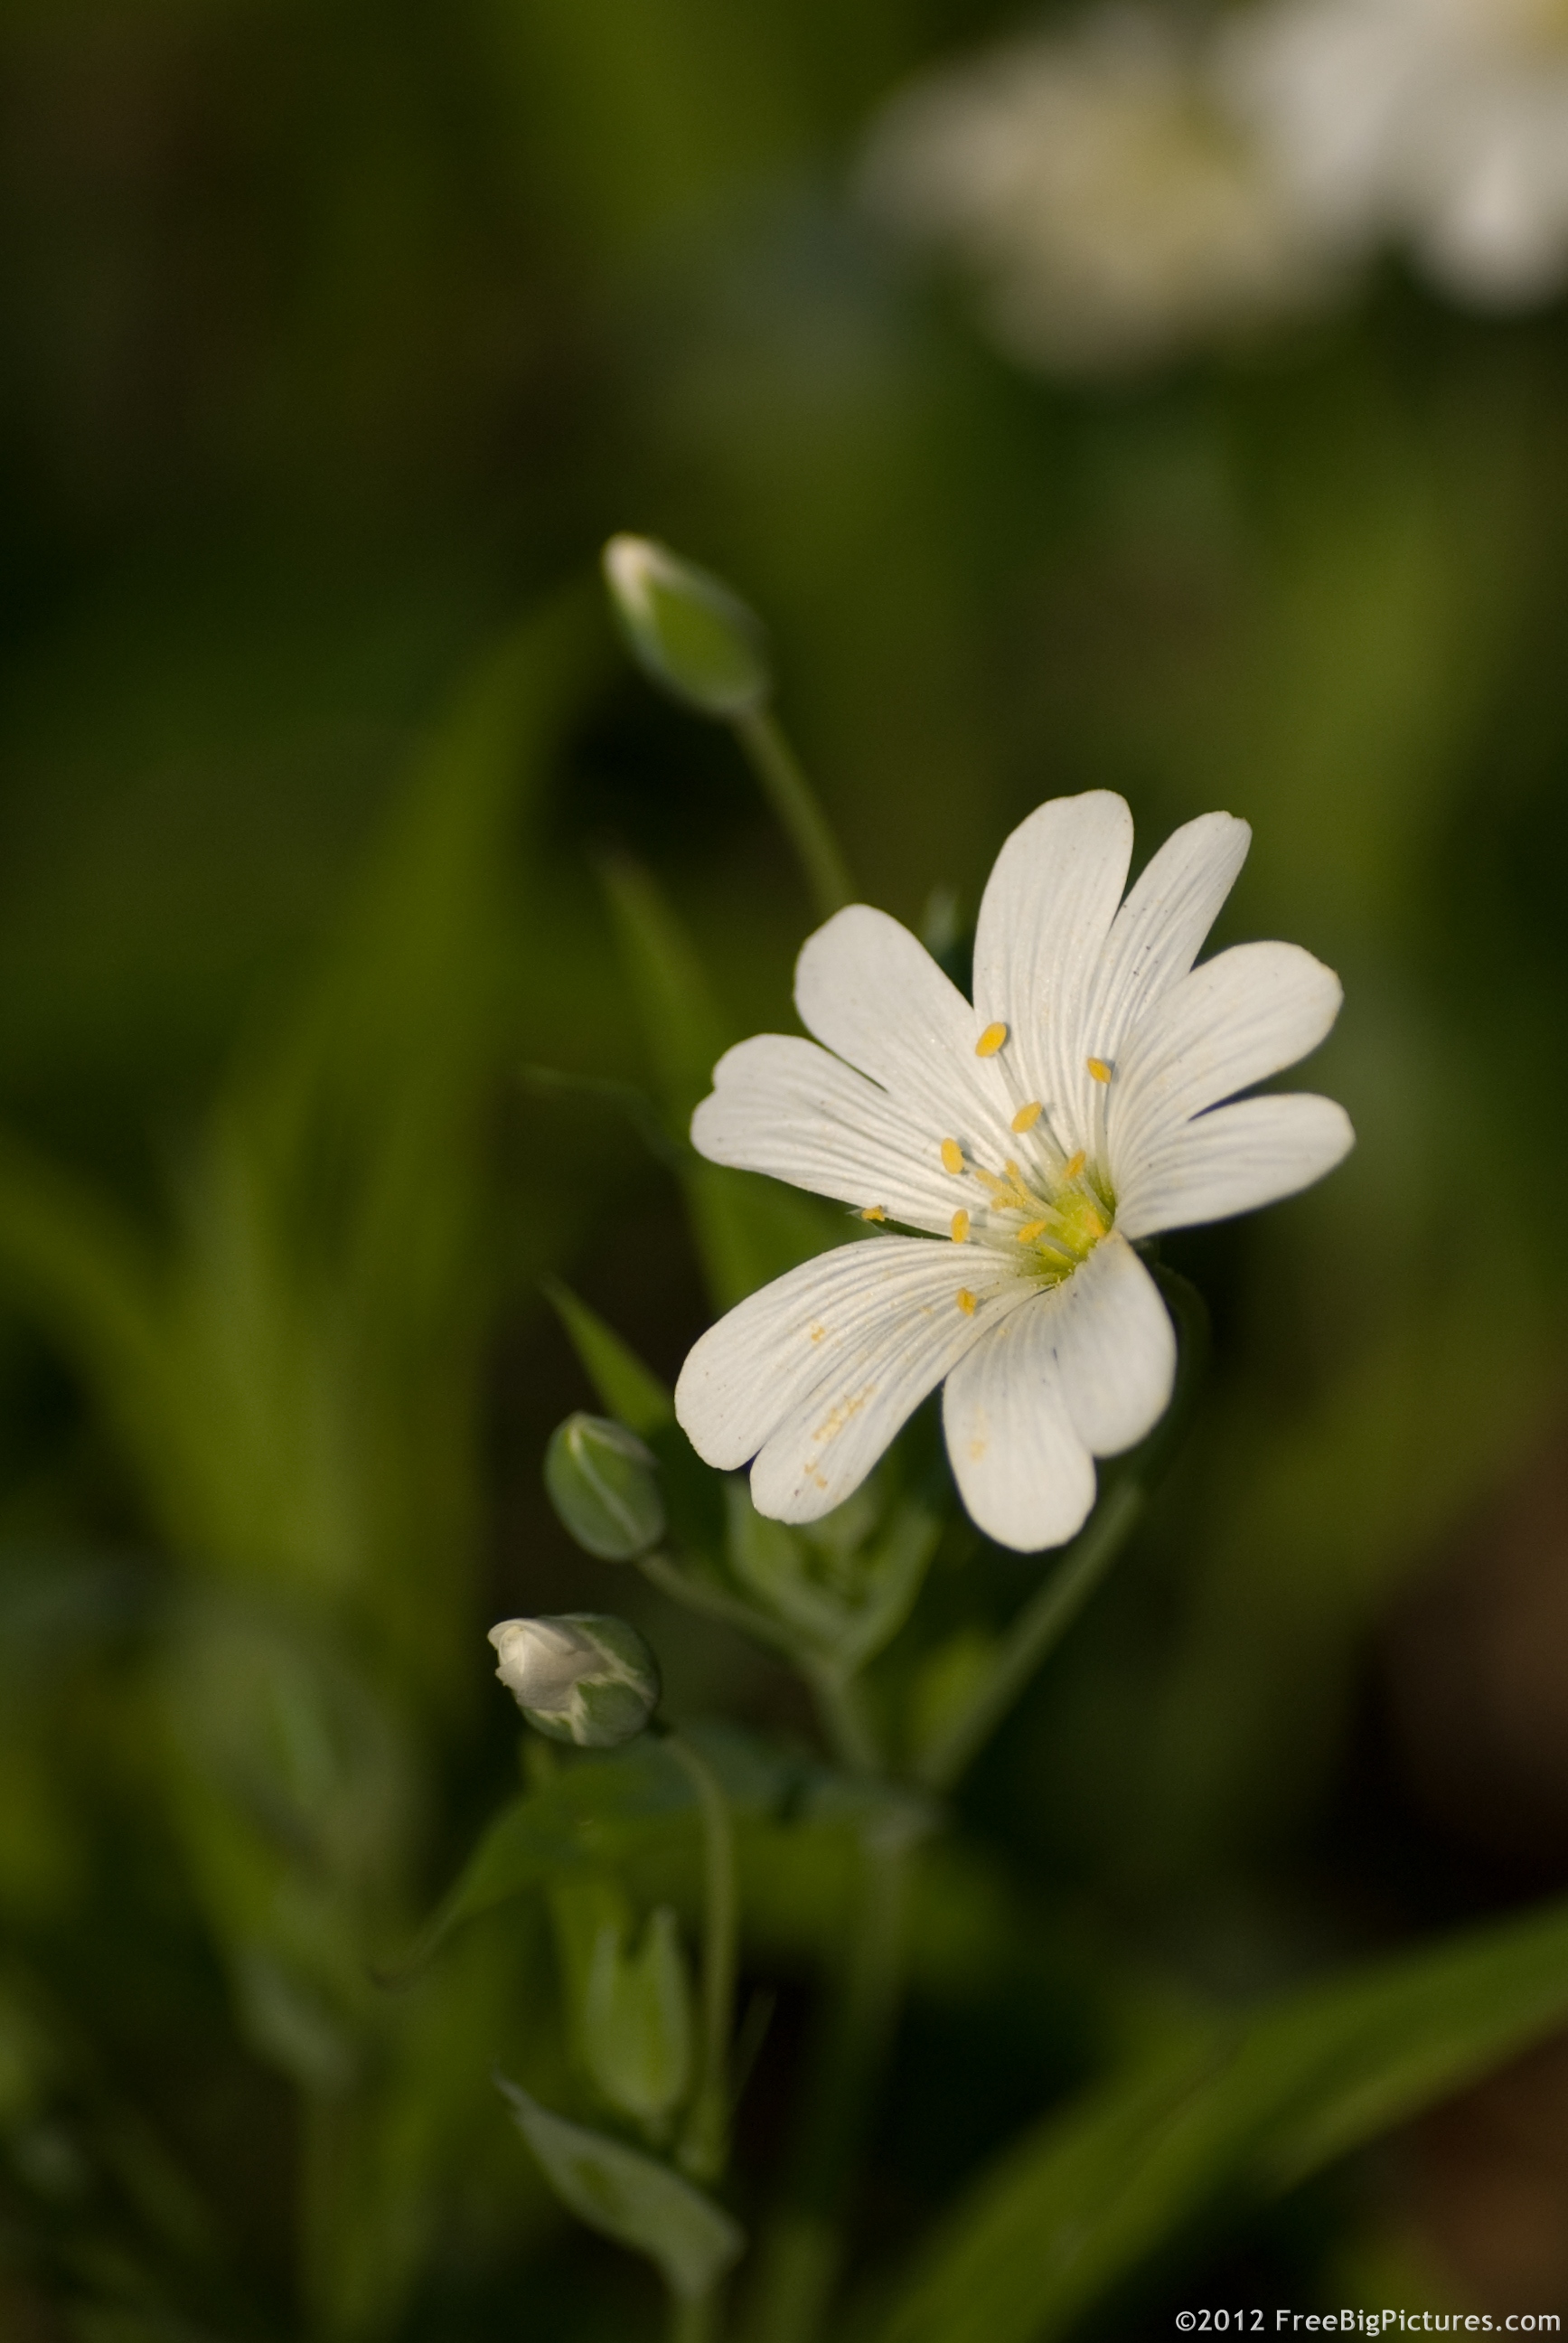 A white Field Chickweed flower in april